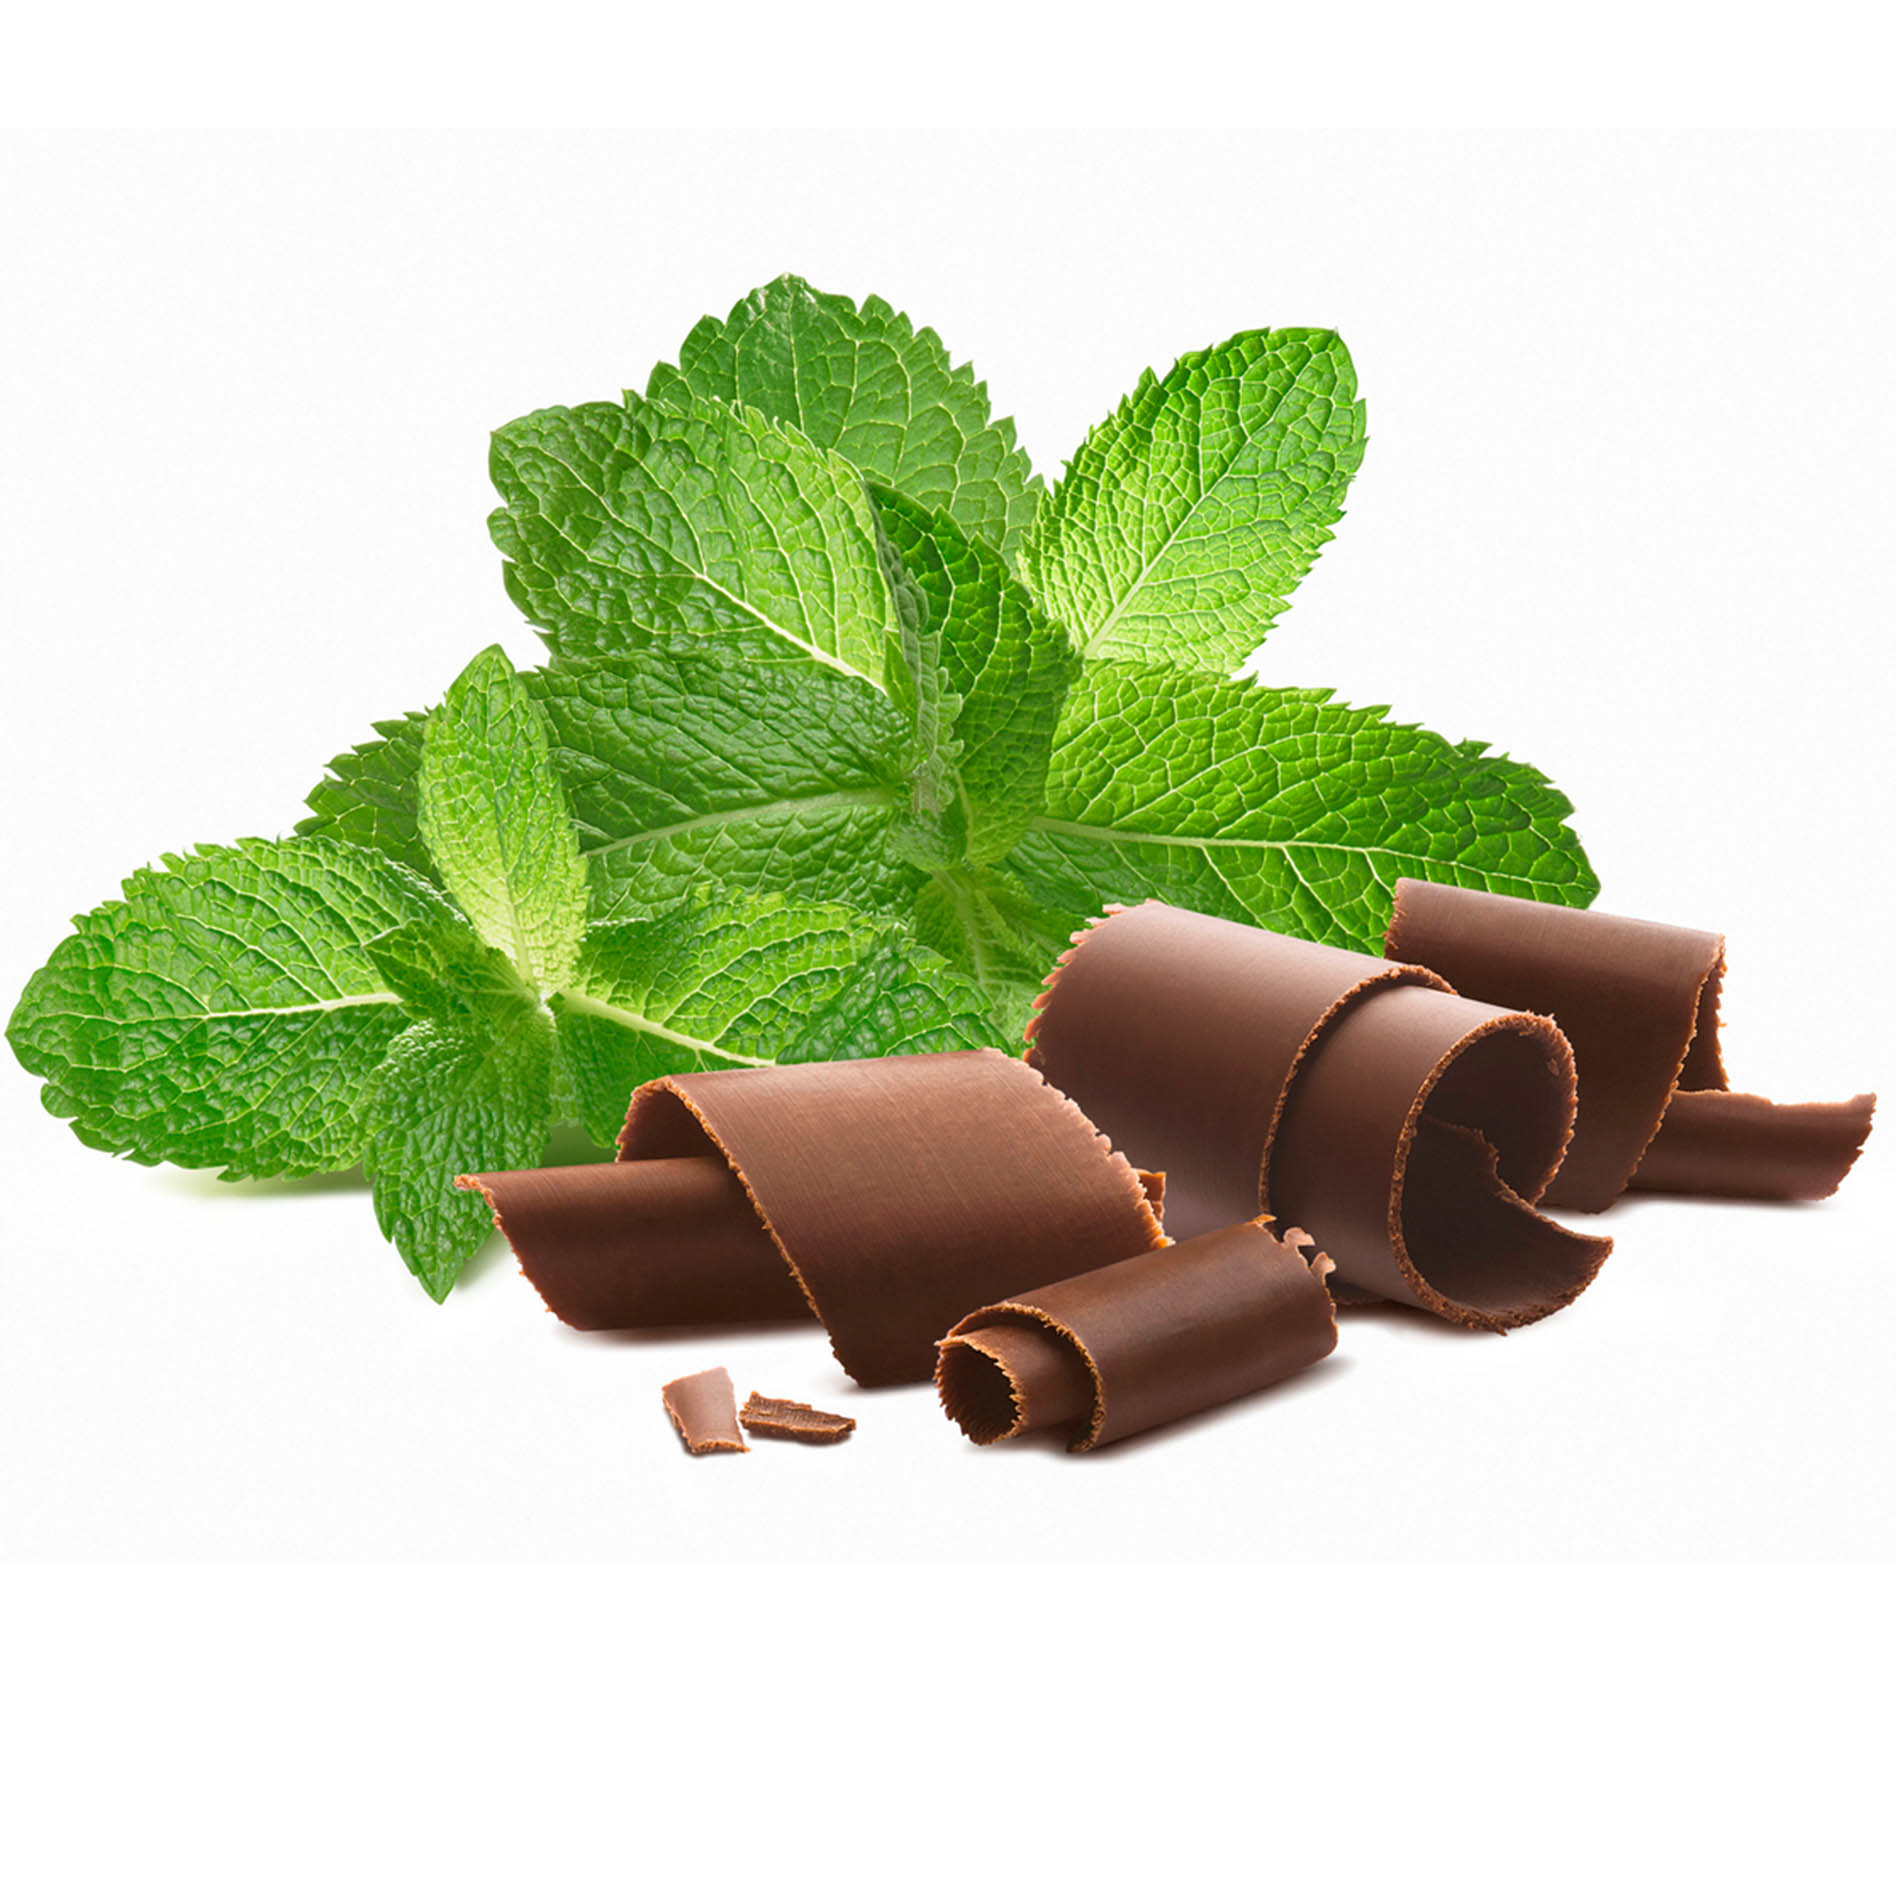 Dark Chocolate Crunchy Mints - 10 pieces of leaf-shaped choc mints - ideal  as after dinner mints